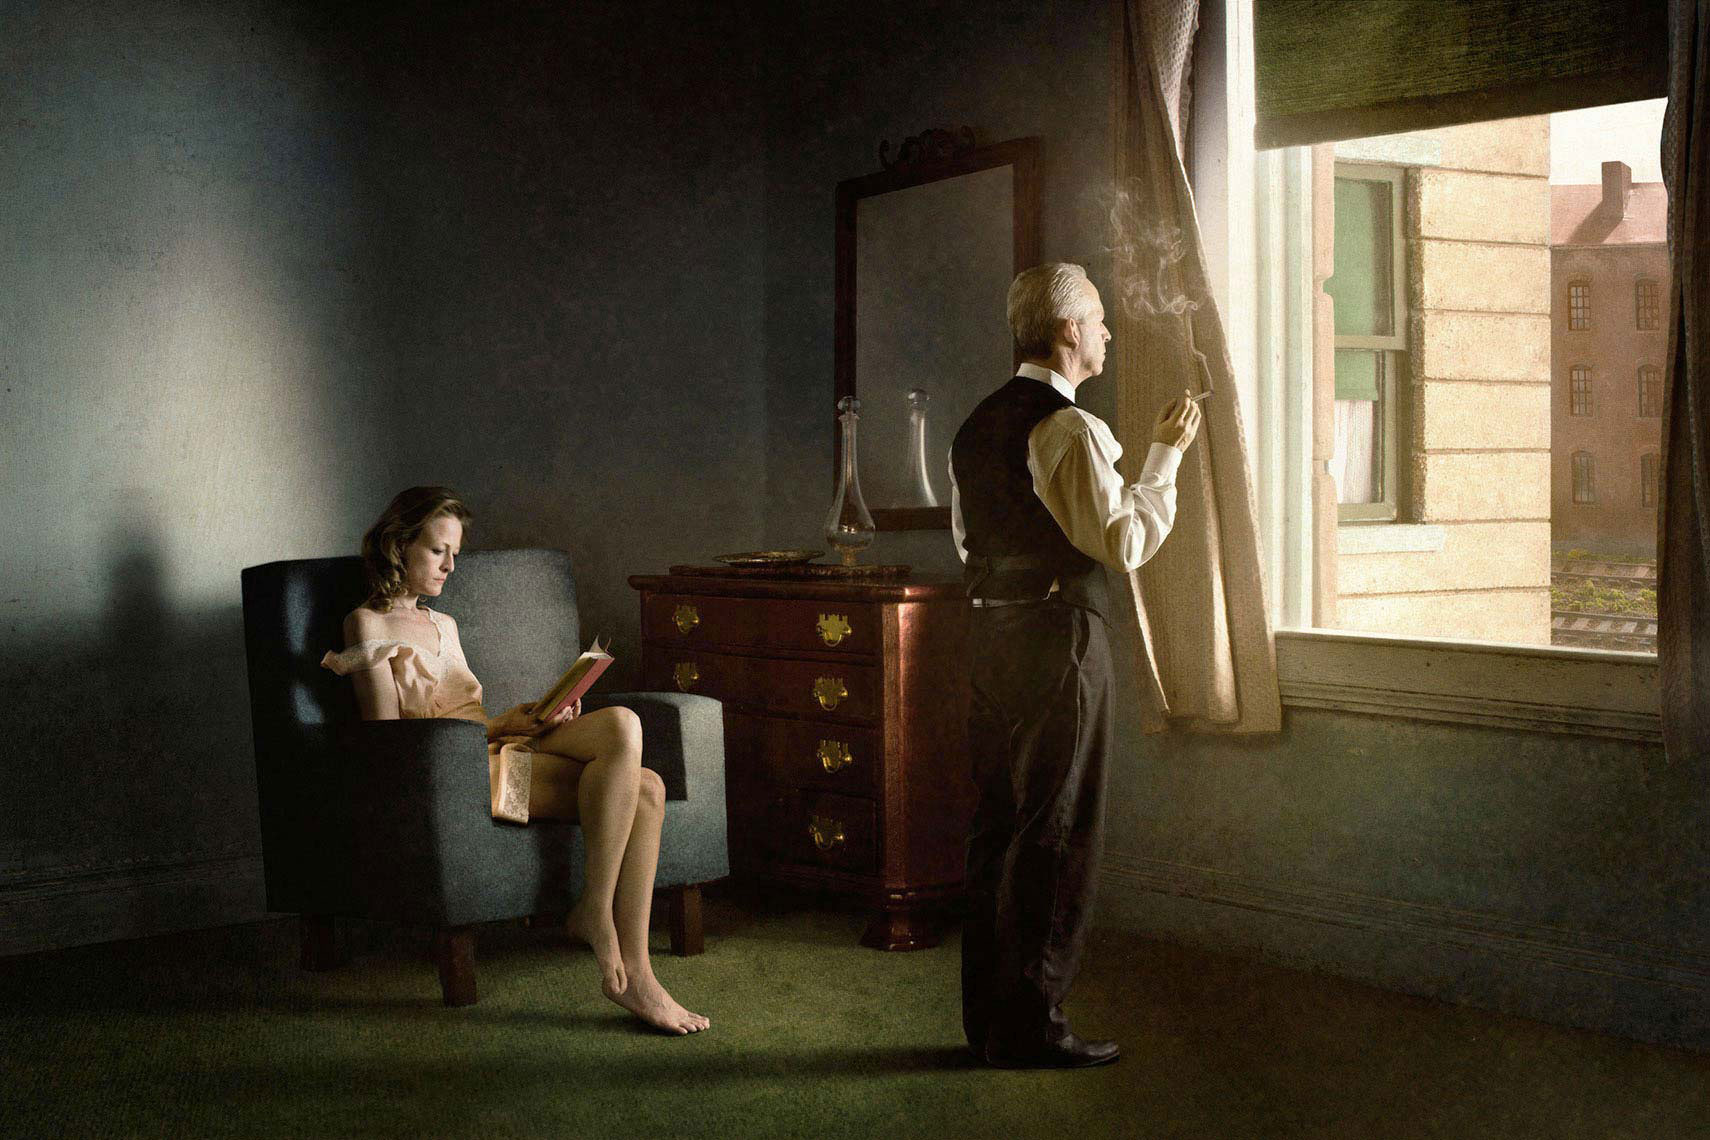 A photomontage homage to Edward Hopper’s painting, “Hotel by a Railroad”, set in a 1940s’ hotel room, a dishwater-blonde woman wearing a pale pink slip sits in an armchair reading, while her male companion, stands smoking a cigarette and gazing in contemplation out the window onto the railroad tracks.